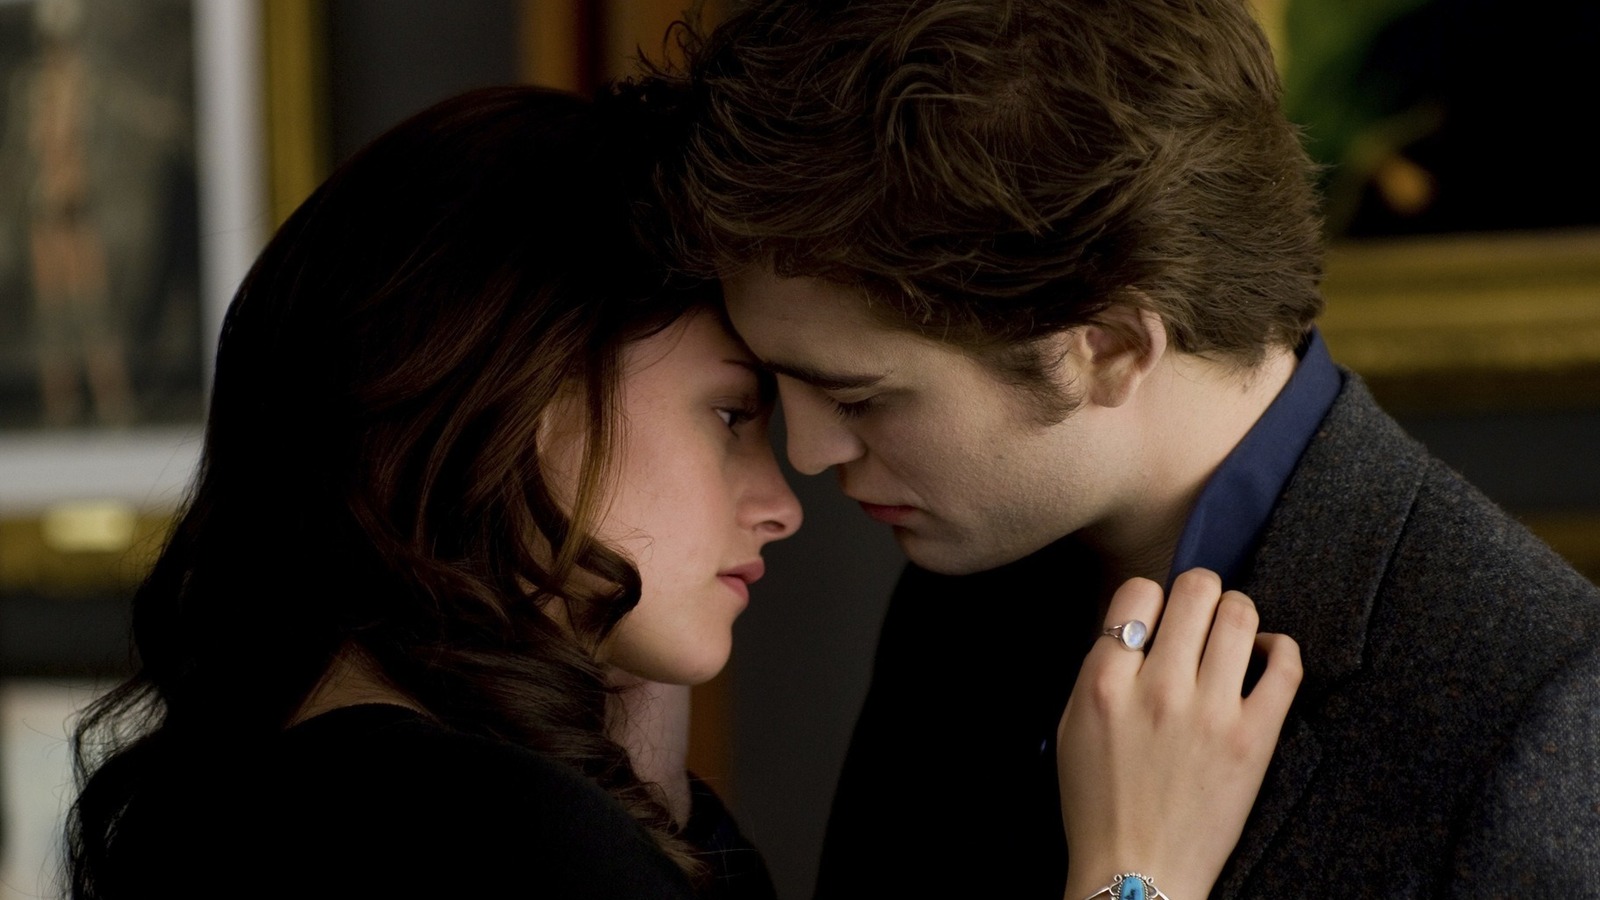 edward and bella kissing in new moon